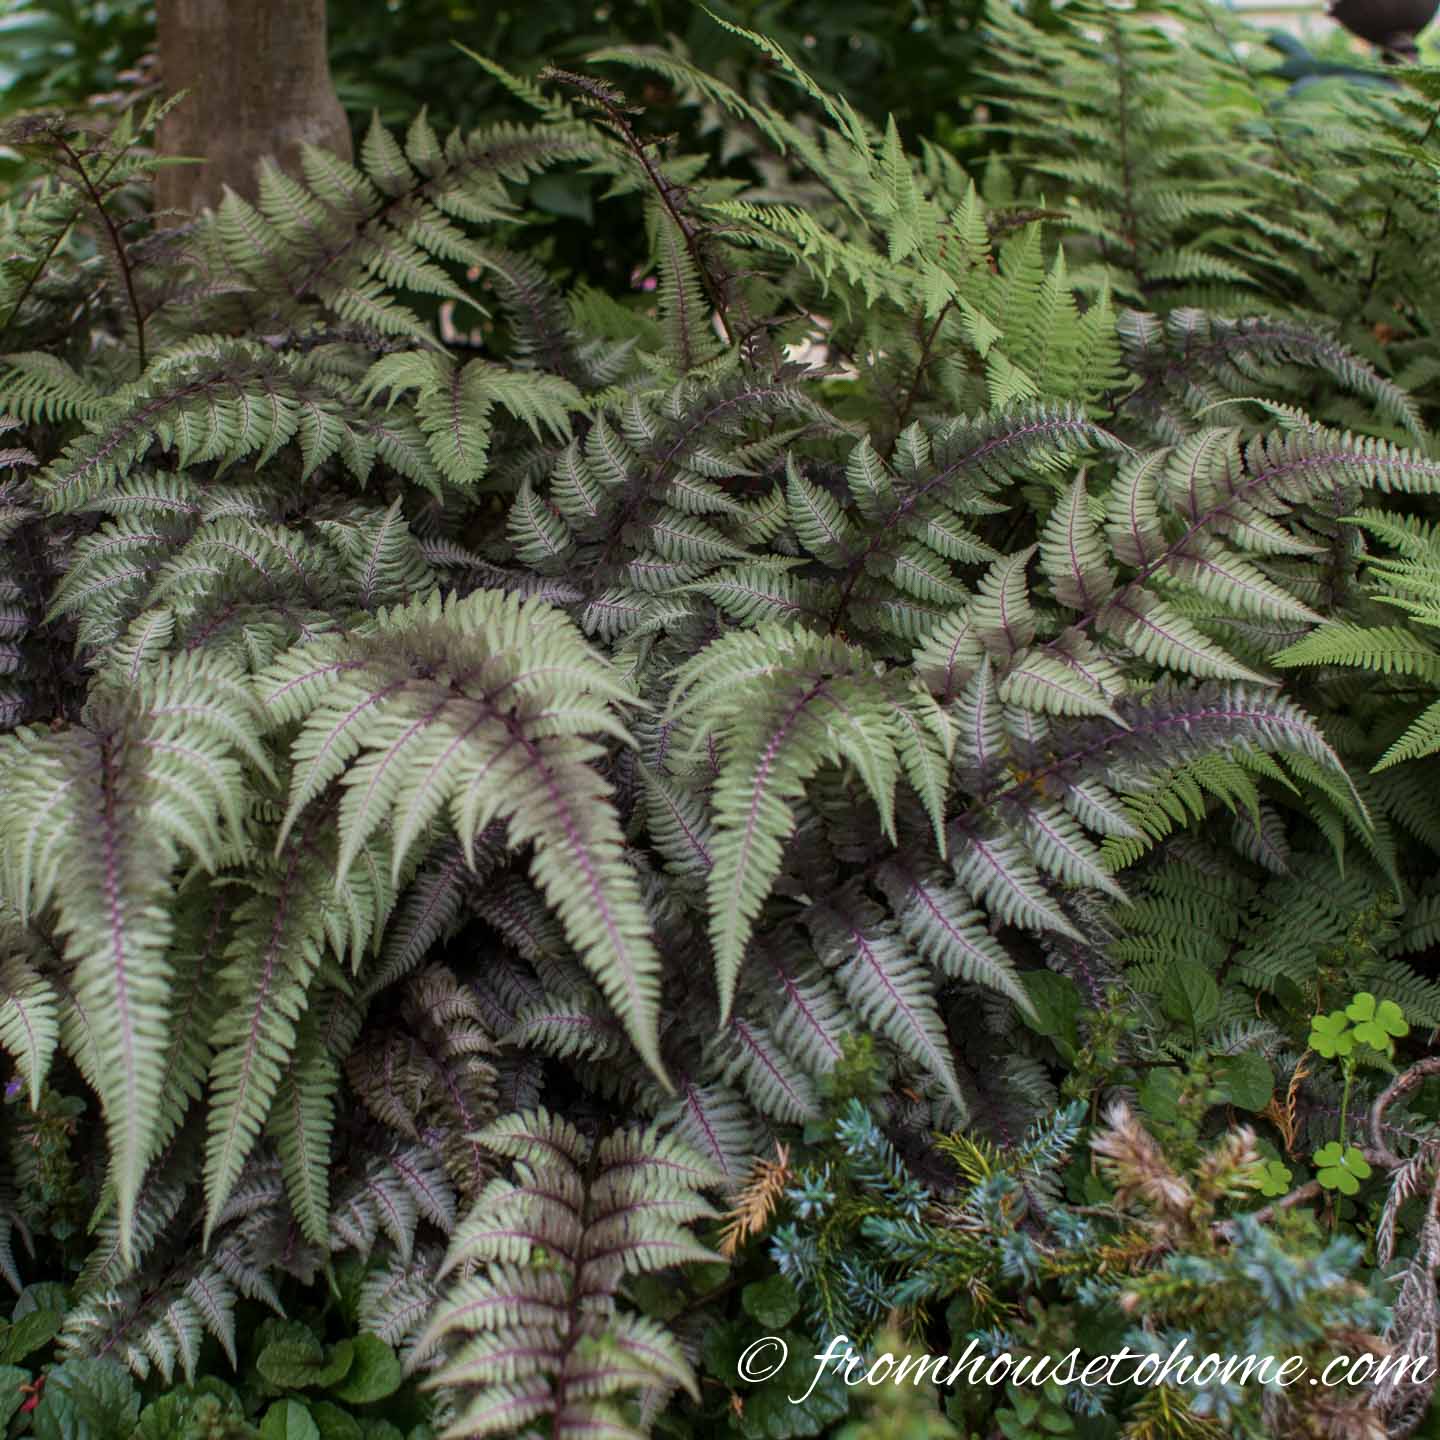 Japanese painted fern and ghost fern